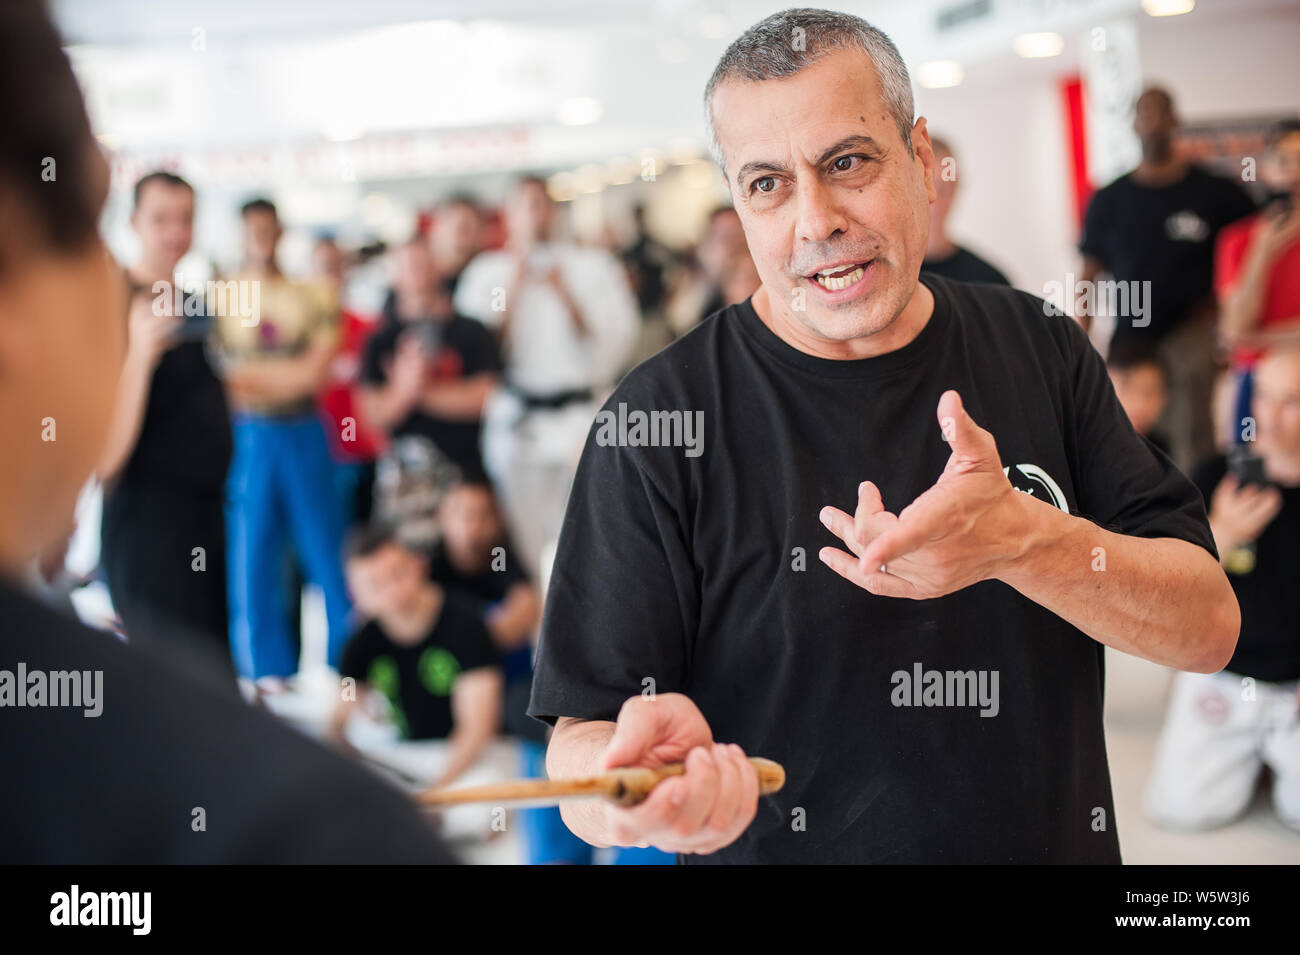 ISTANBUL, TURKEY - Maj 30 - Jun 02. 2019. Kapap instructor Avi Nardia demonstrate knife fighting to large group of his students on GENERAL MEETING OF Stock Photo